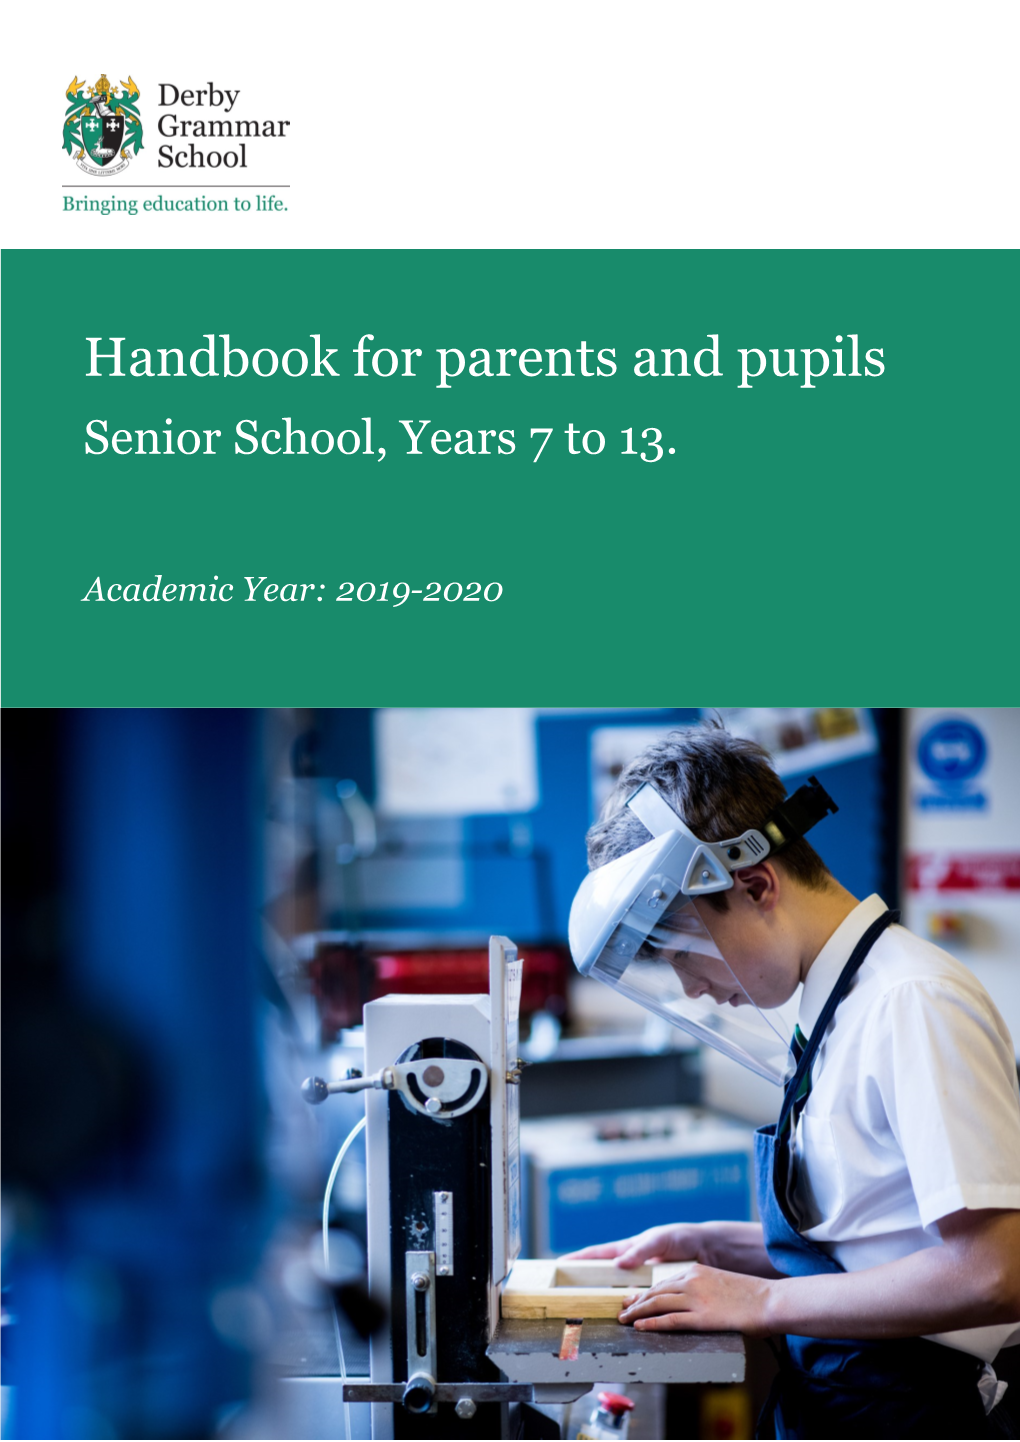 Handbook for Parents and Pupils Senior School, Years 7 to 13